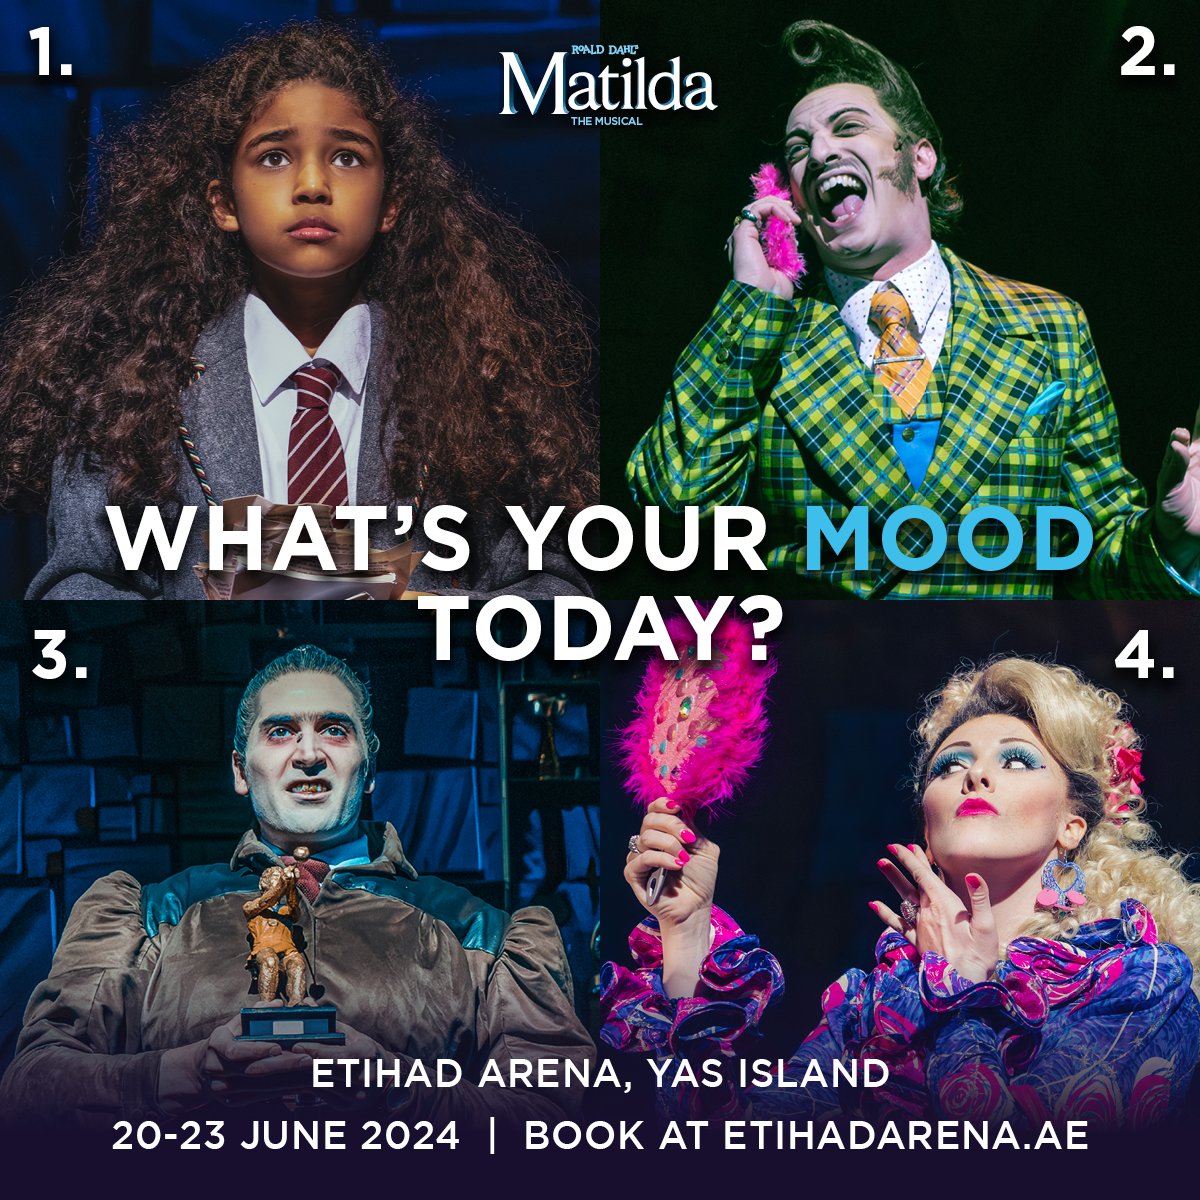 The whimsical world of Matilda arrives at #EtihadArena soon 📚✨ 

Which mood are you in today: mischievous mischief-maker or clever bookworm? 

@matildamusical @yasbayuae @yasisland @inabudhabi